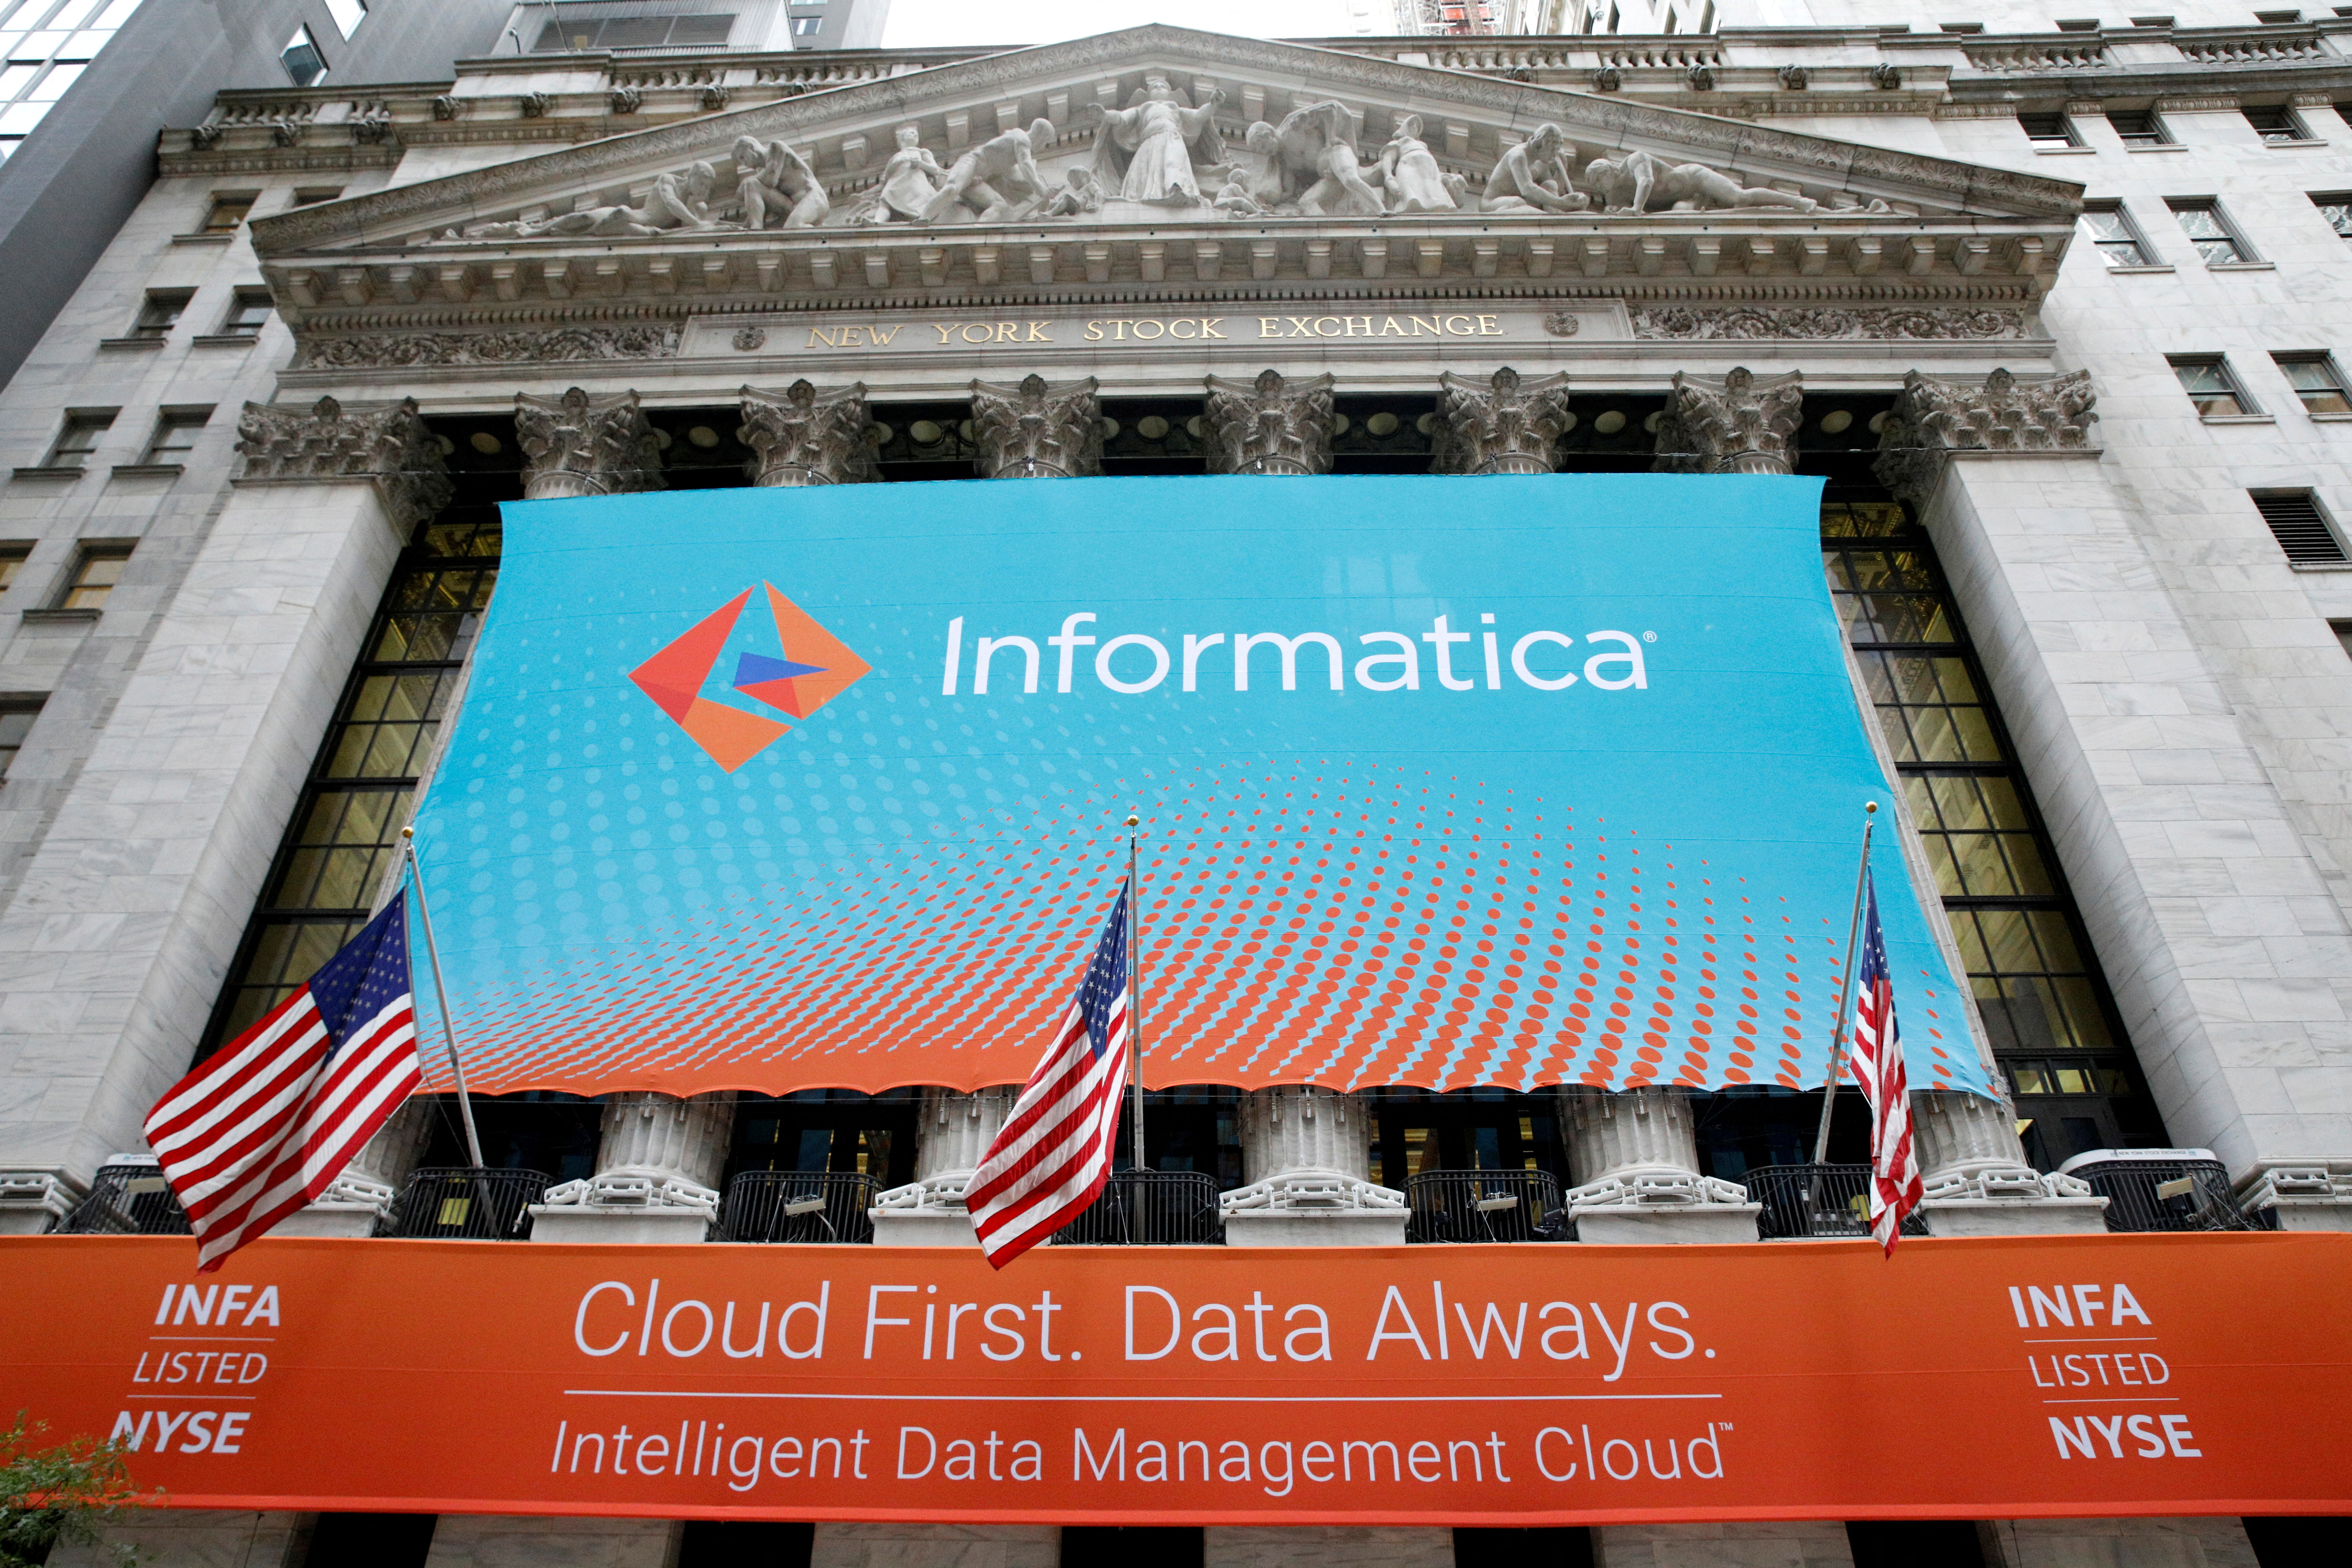 A banner celebrating the Informatica IPO on the front of the NYSE in New York